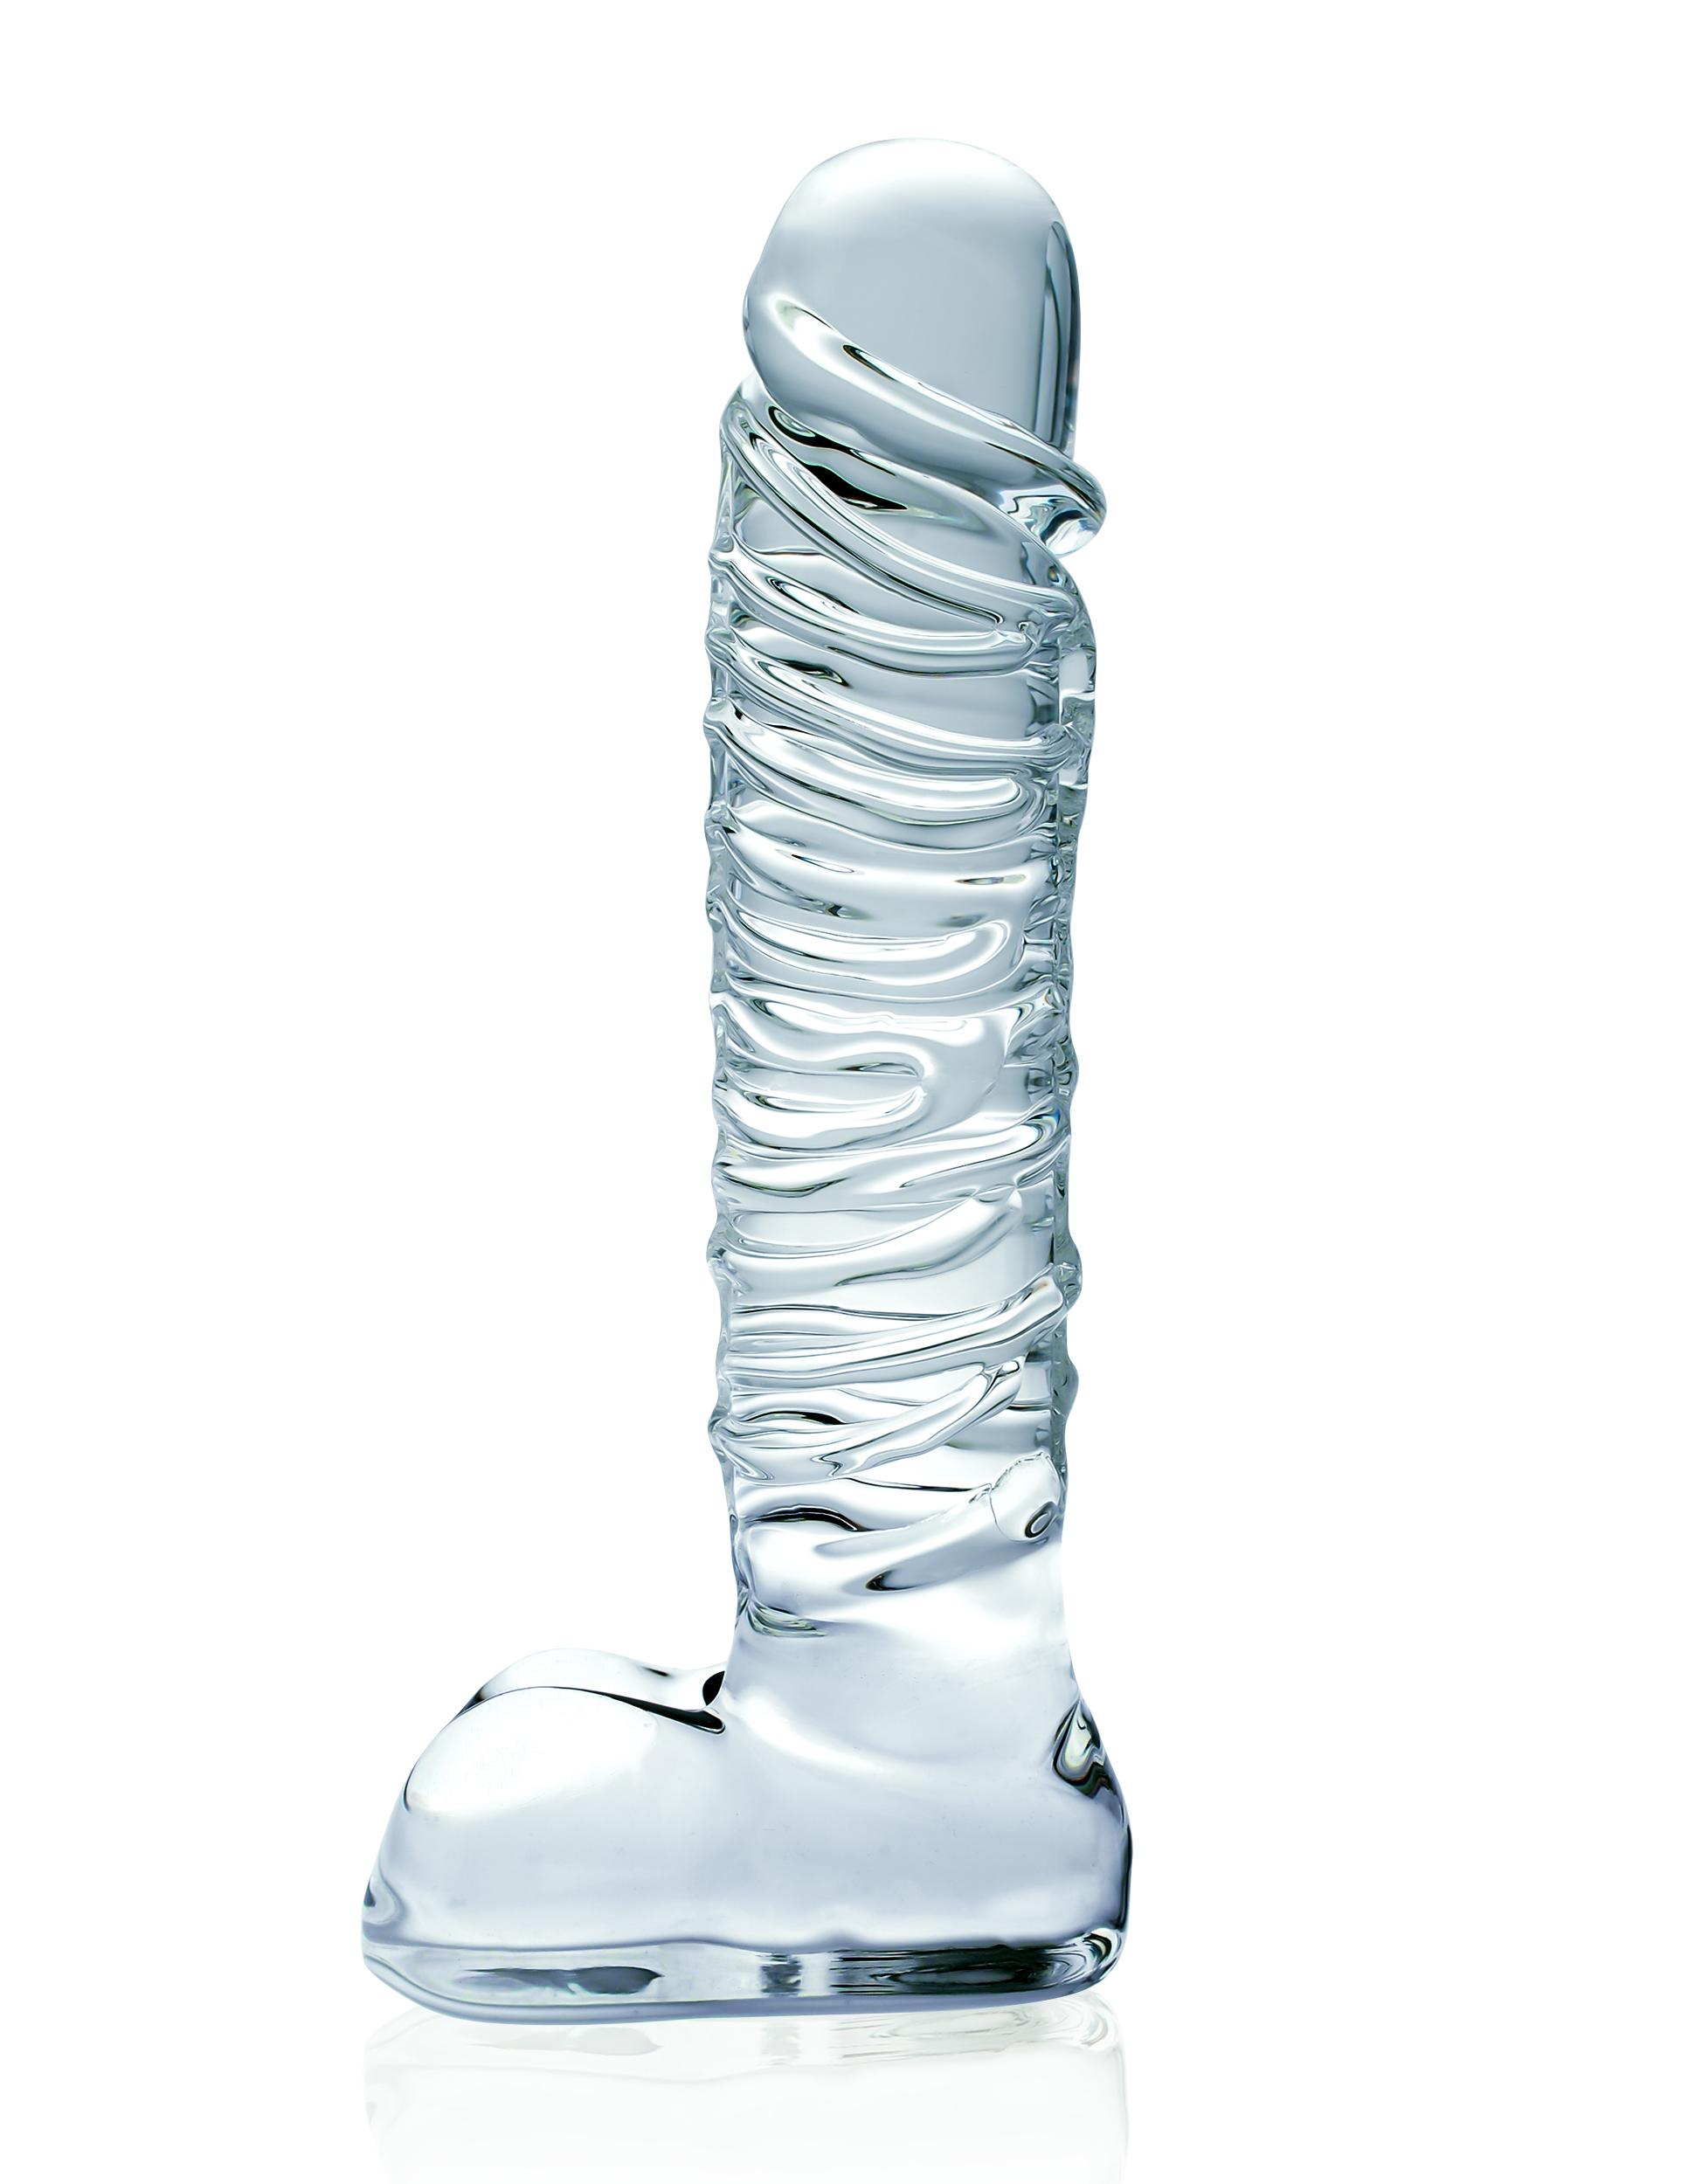 Icicles+No+63+Textured+Glass+Dildo+With+Balls